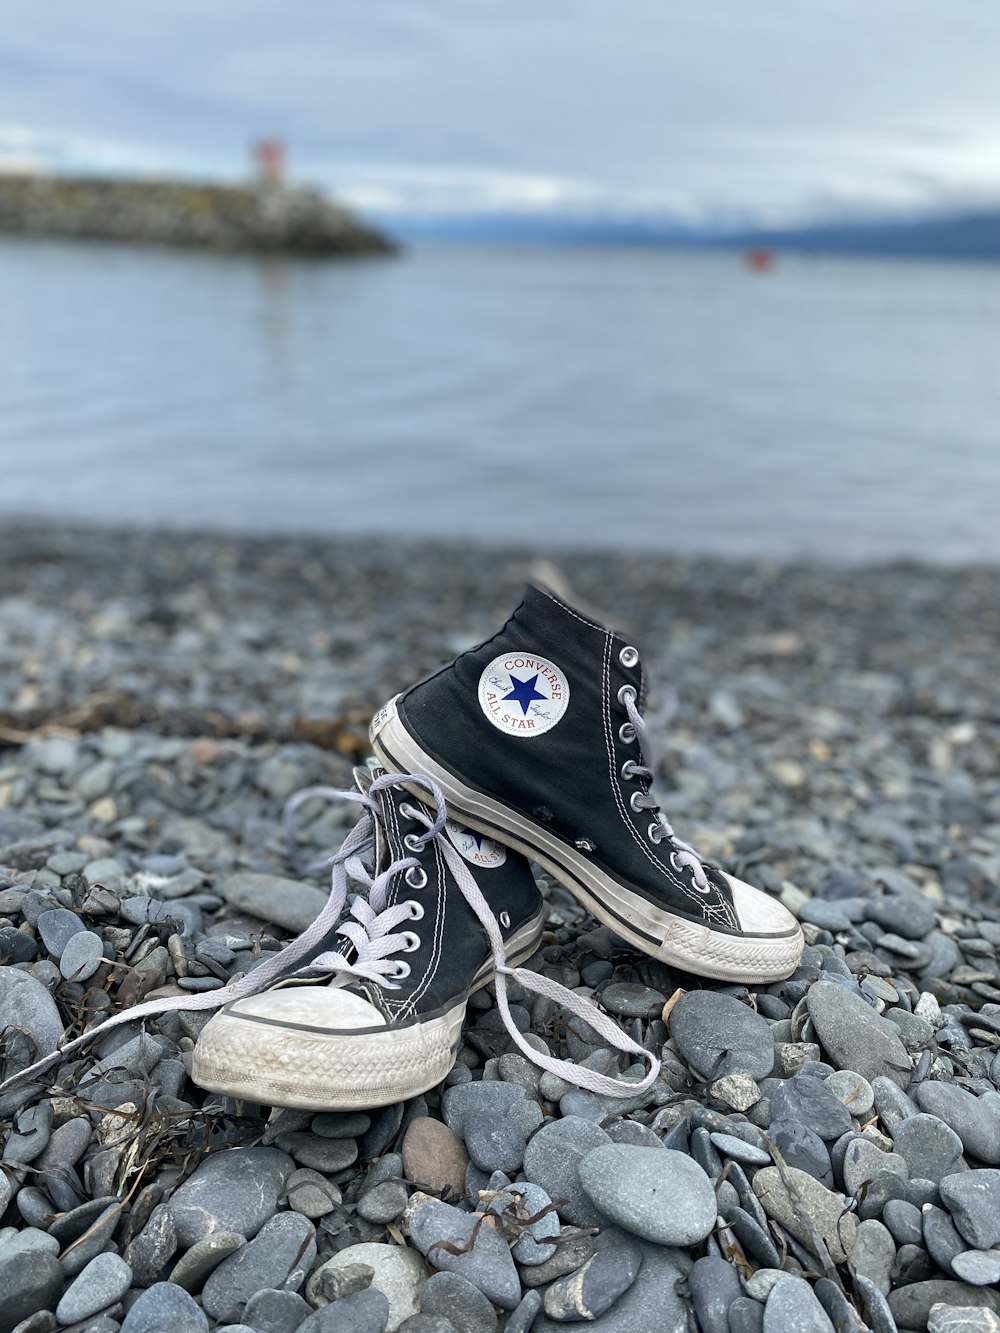 Black converse all star high top sneakers on rocky shore photo – Free Black  converse Image on Unsplash